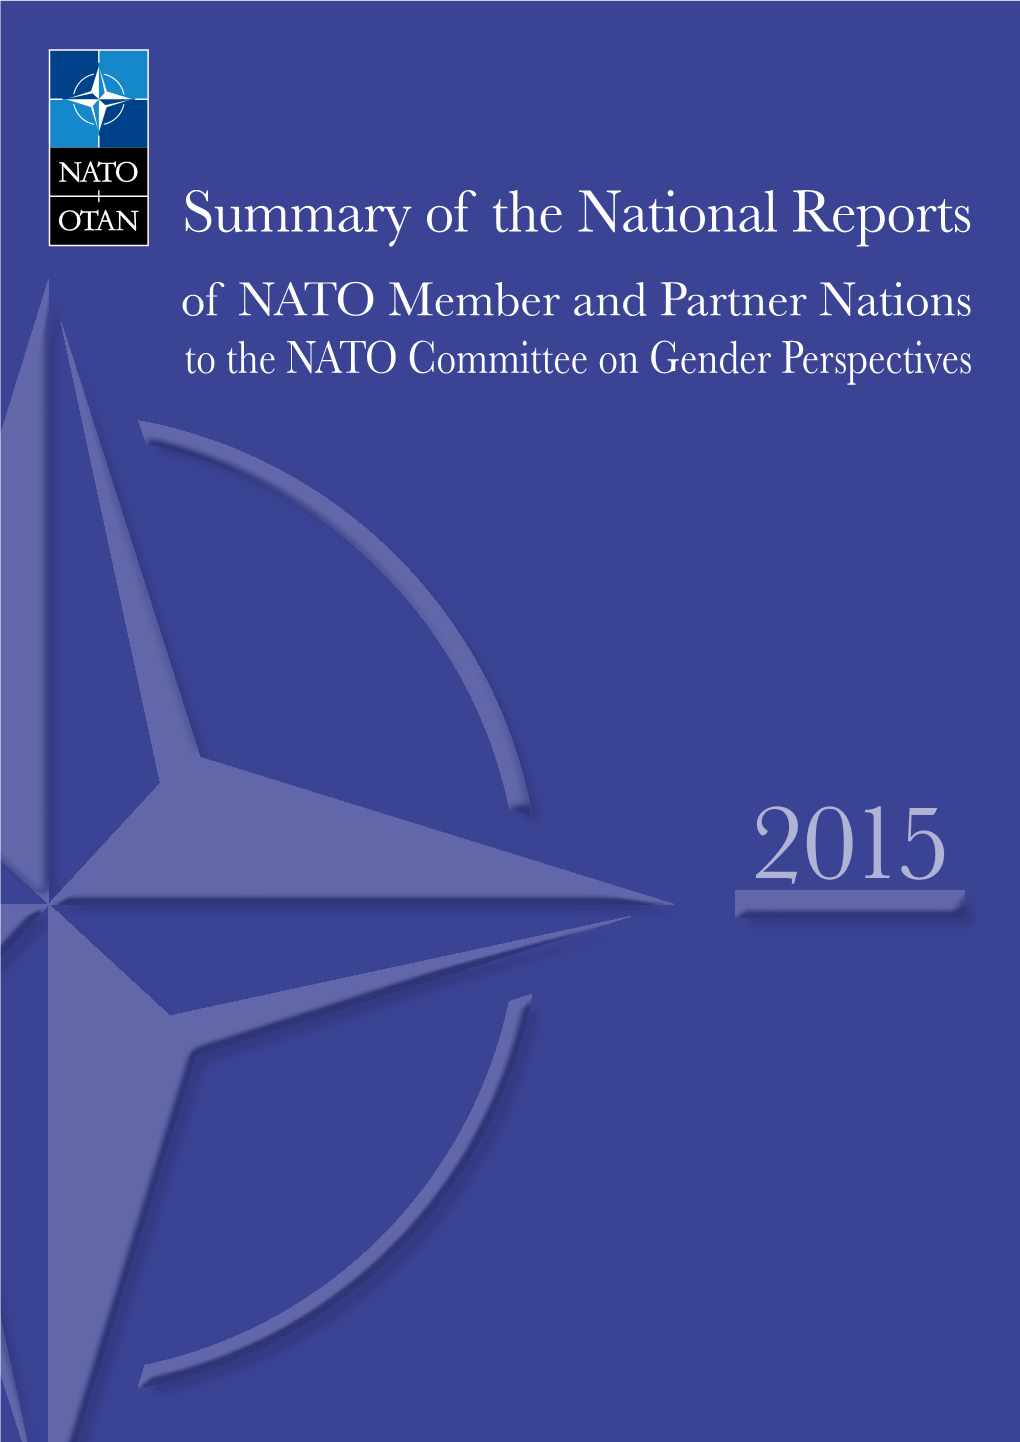 Summary of the National Reports of NATO Member and Partner Nations to the NATO Committee on Gender Perspectives